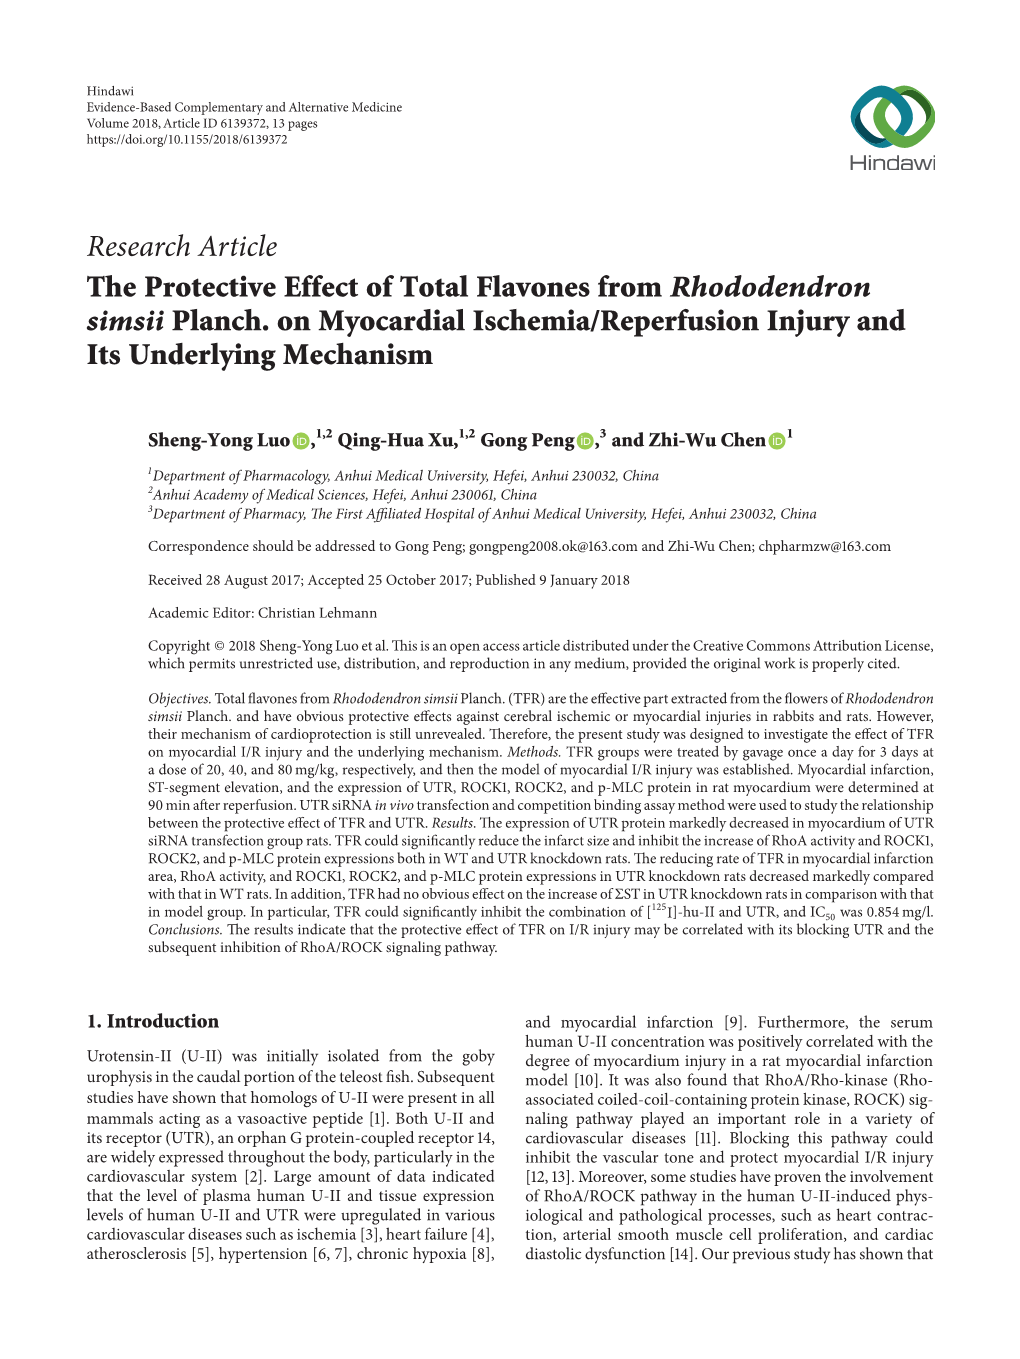 The Protective Effect of Total Flavones from Rhododendron Simsii Planch